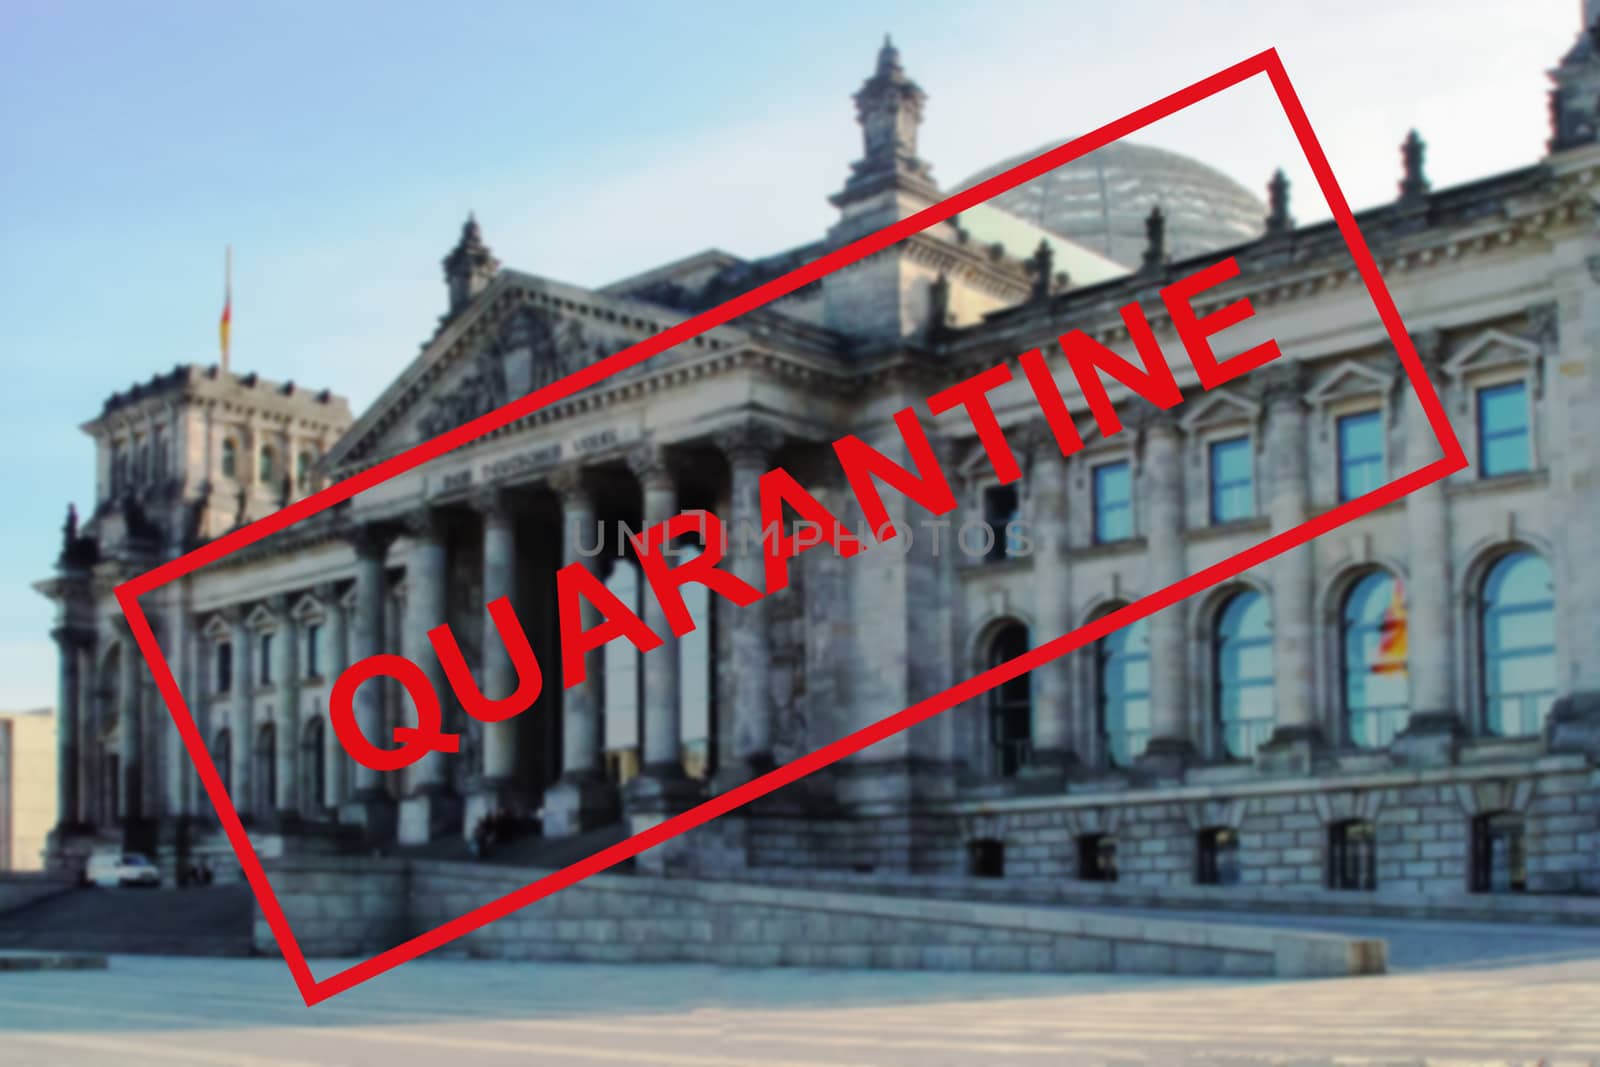 Coronavirus quarantine in Europe. Text against the background of the historical architecture of Germany in Berlin. Concept of the economy and financial markets affected by the coronavirus outbreak and fears of a pandemic.